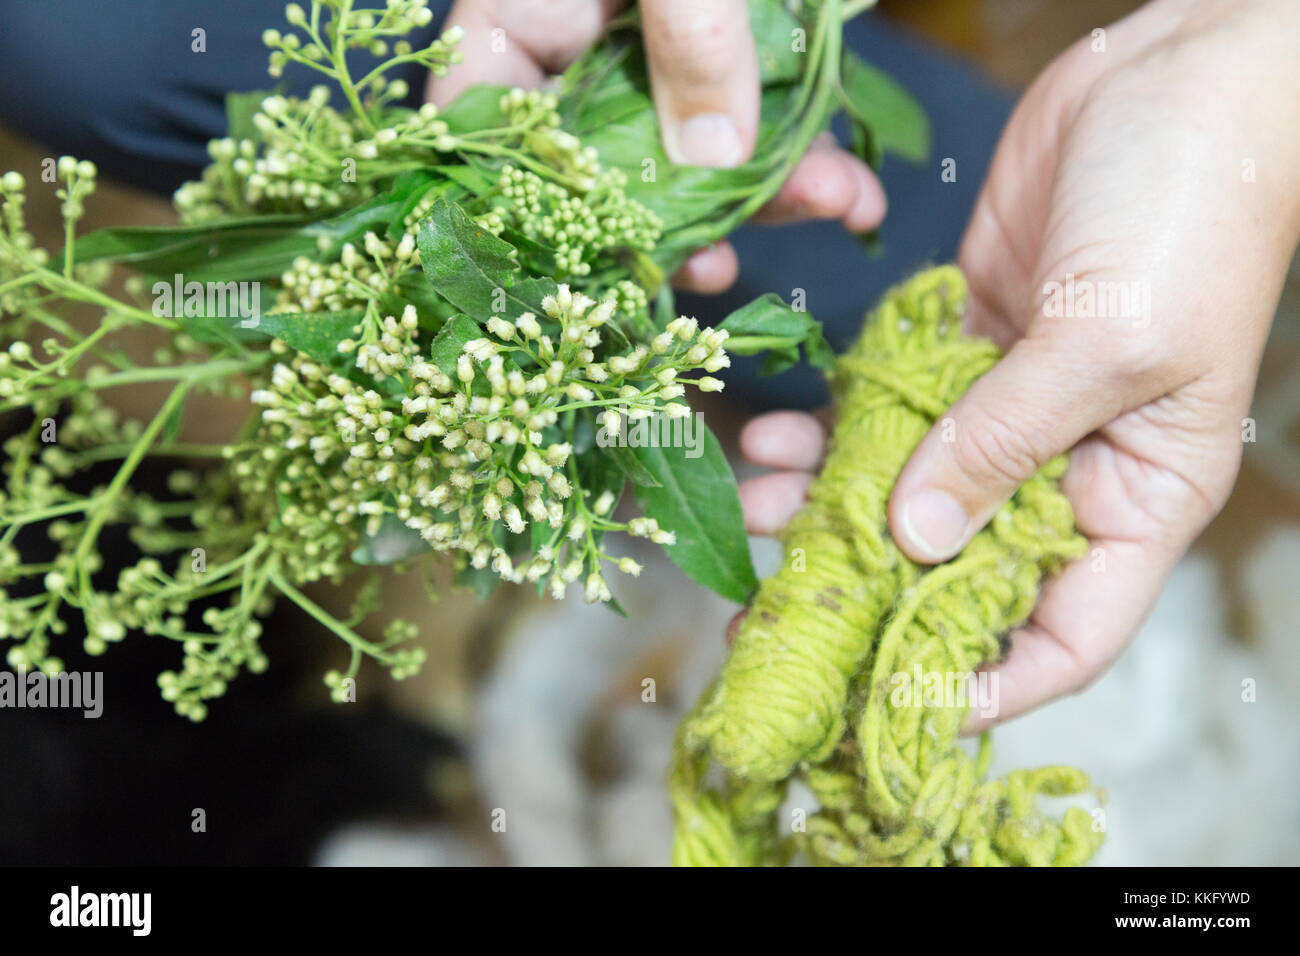 South America culture: - The Chilca Baccharis plant used as a green dye to dye yarn in traditional weaving, Otavalo, Ecuador, South America Stock Photo